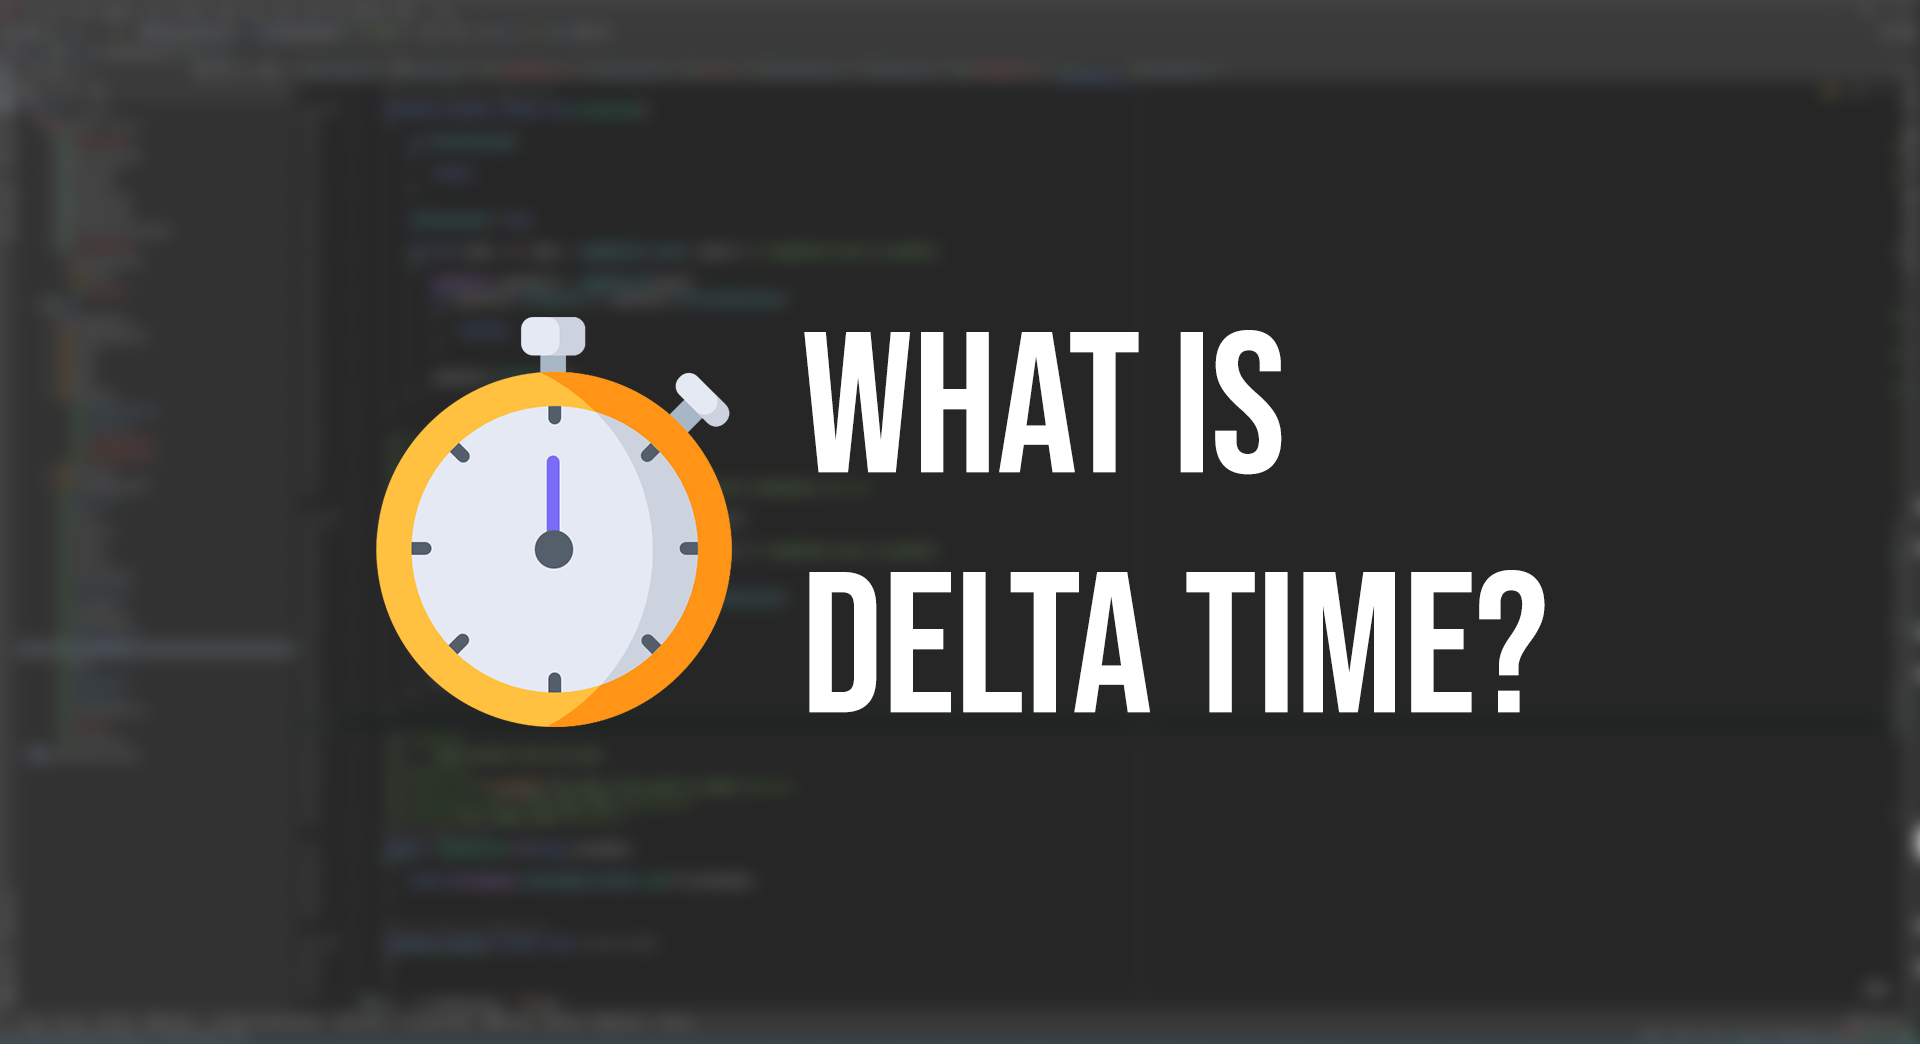 What is delta time?